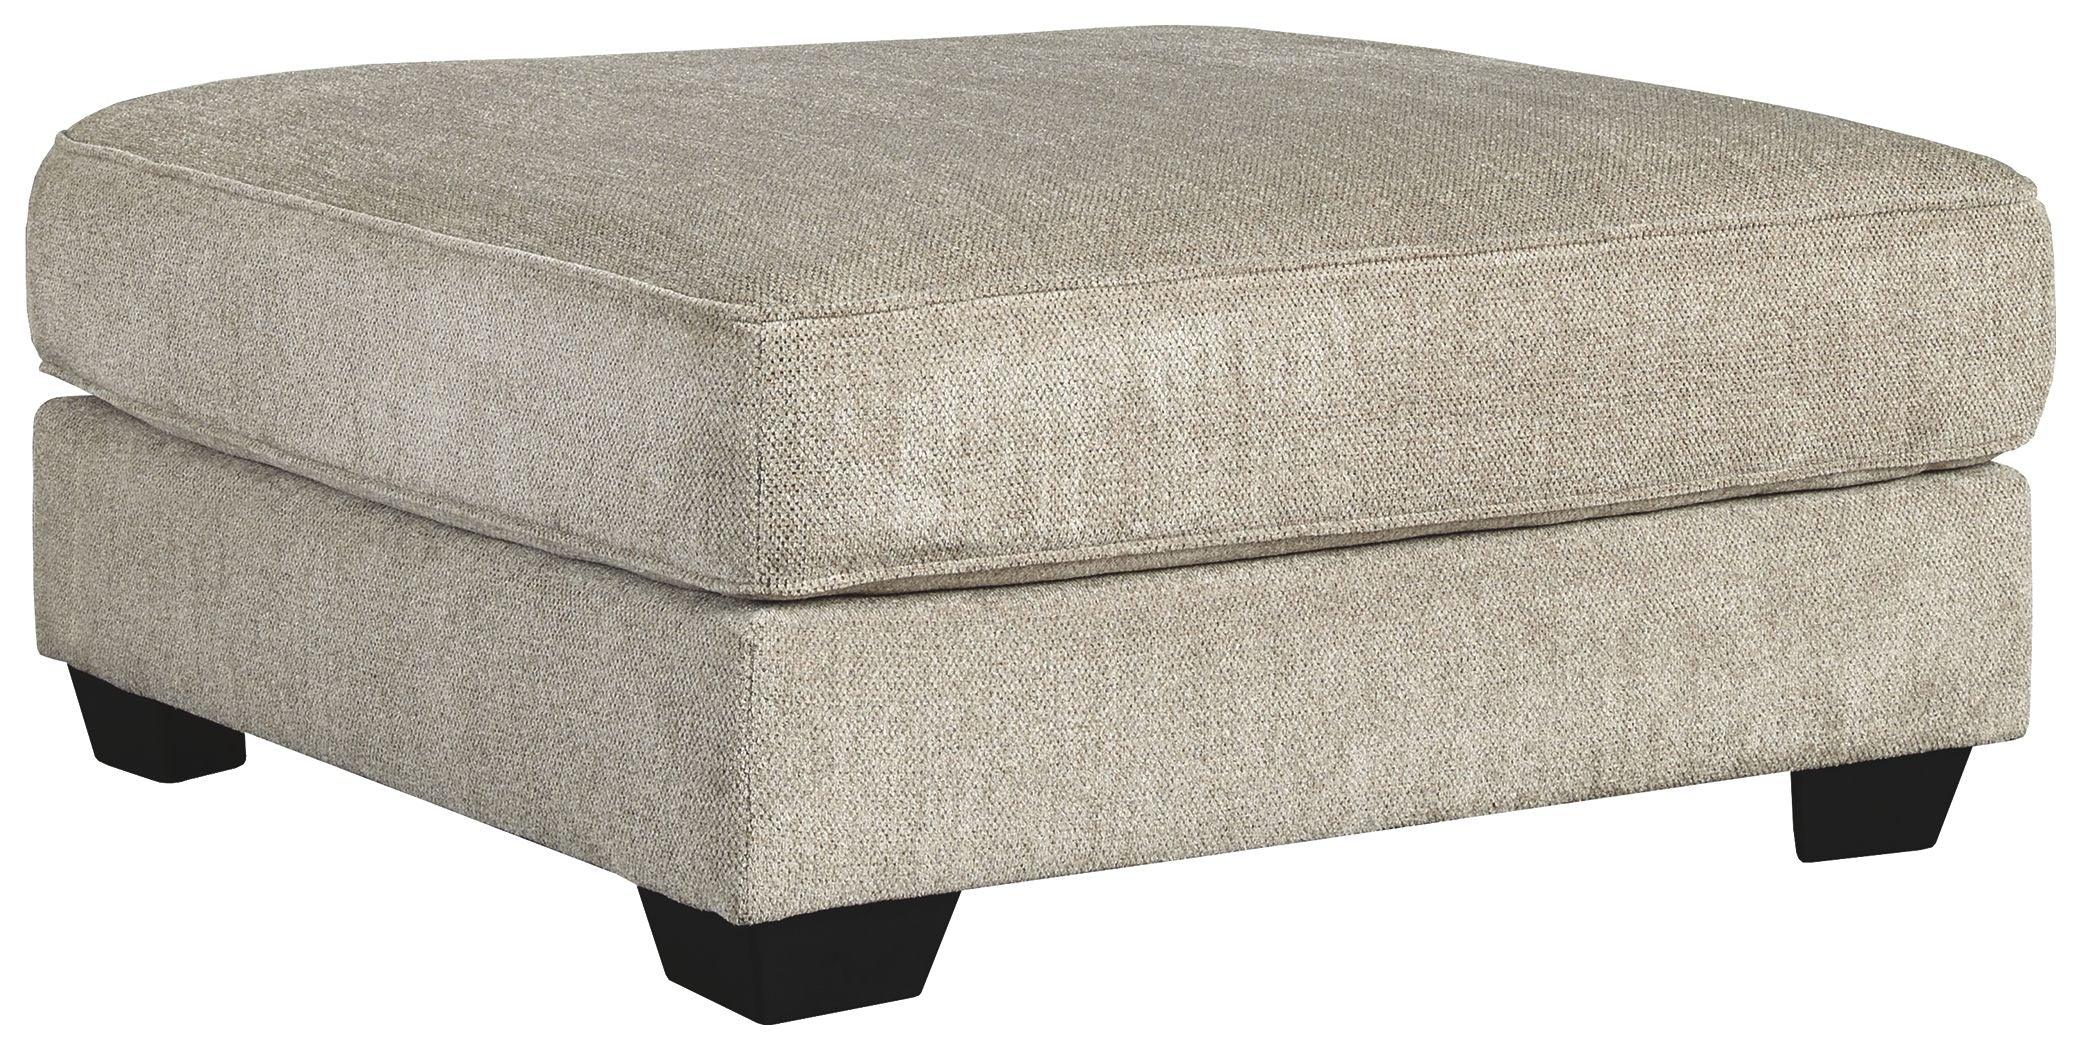 Ashley Furniture - Ardsley - Pewter - Oversized Accent Ottoman - 5th Avenue Furniture